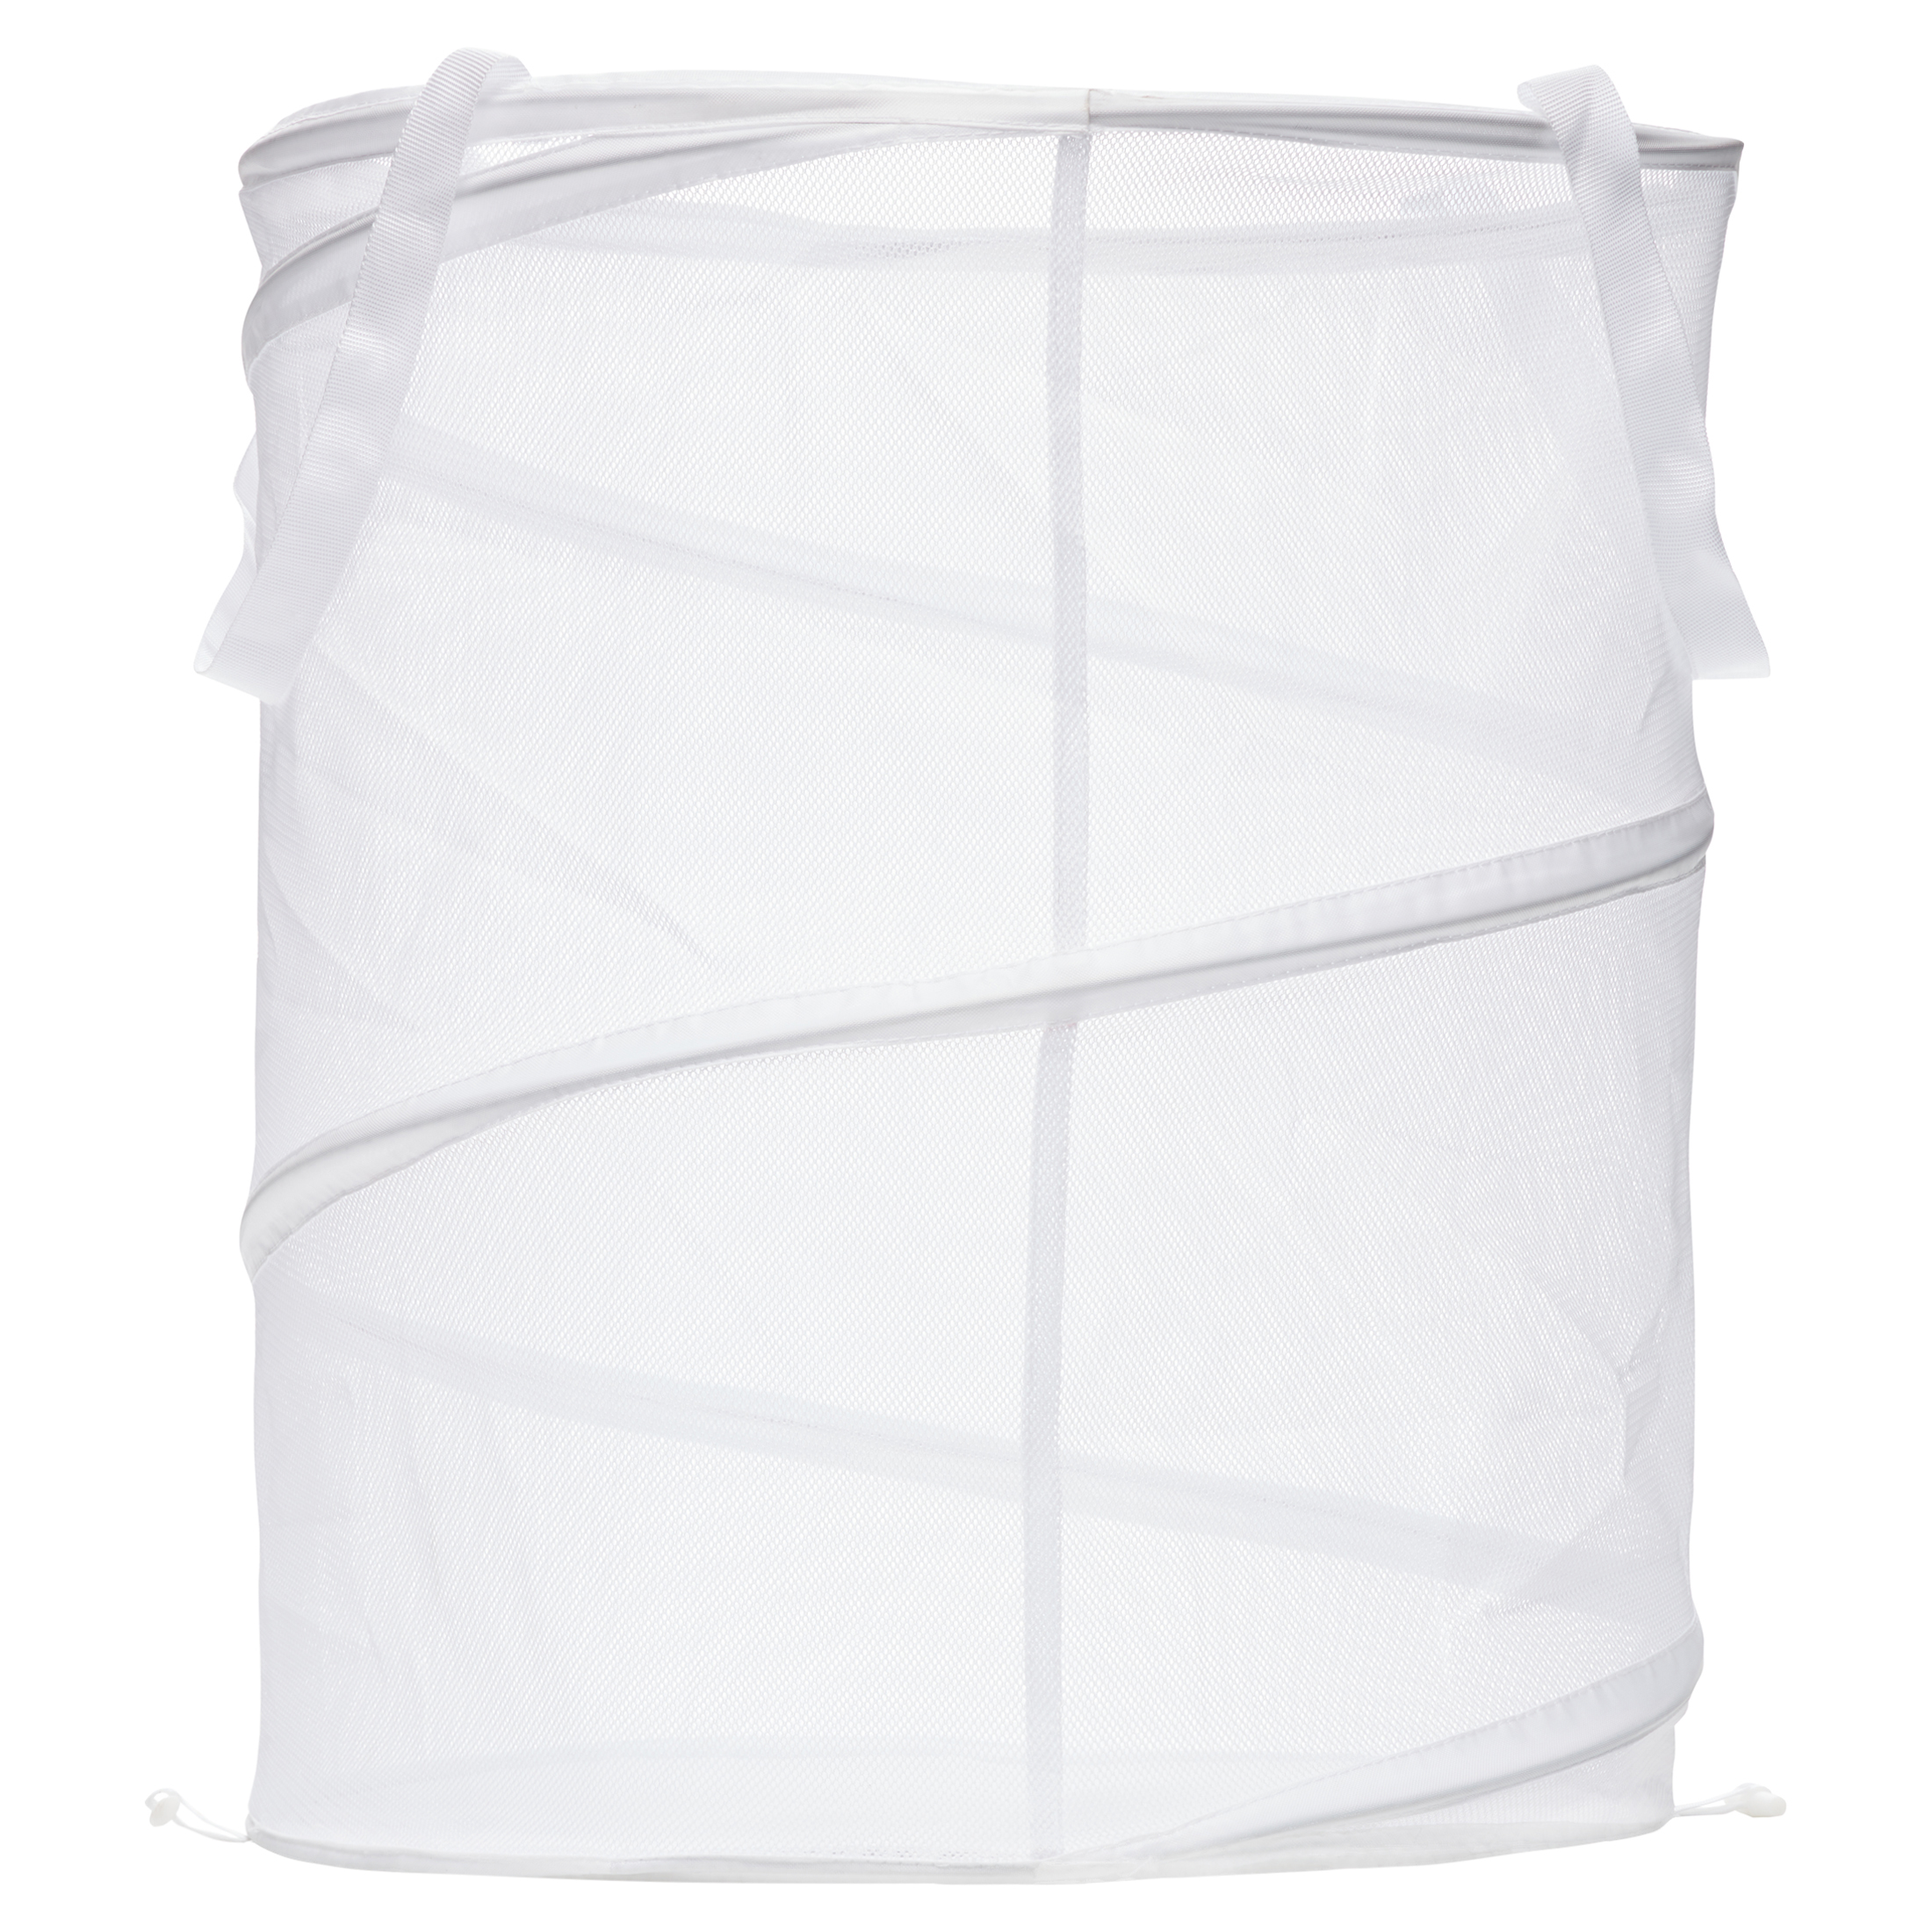 Honey-Can-Do Large Mesh Pop-Up Laundry Hamper with Handles, White - image 3 of 7